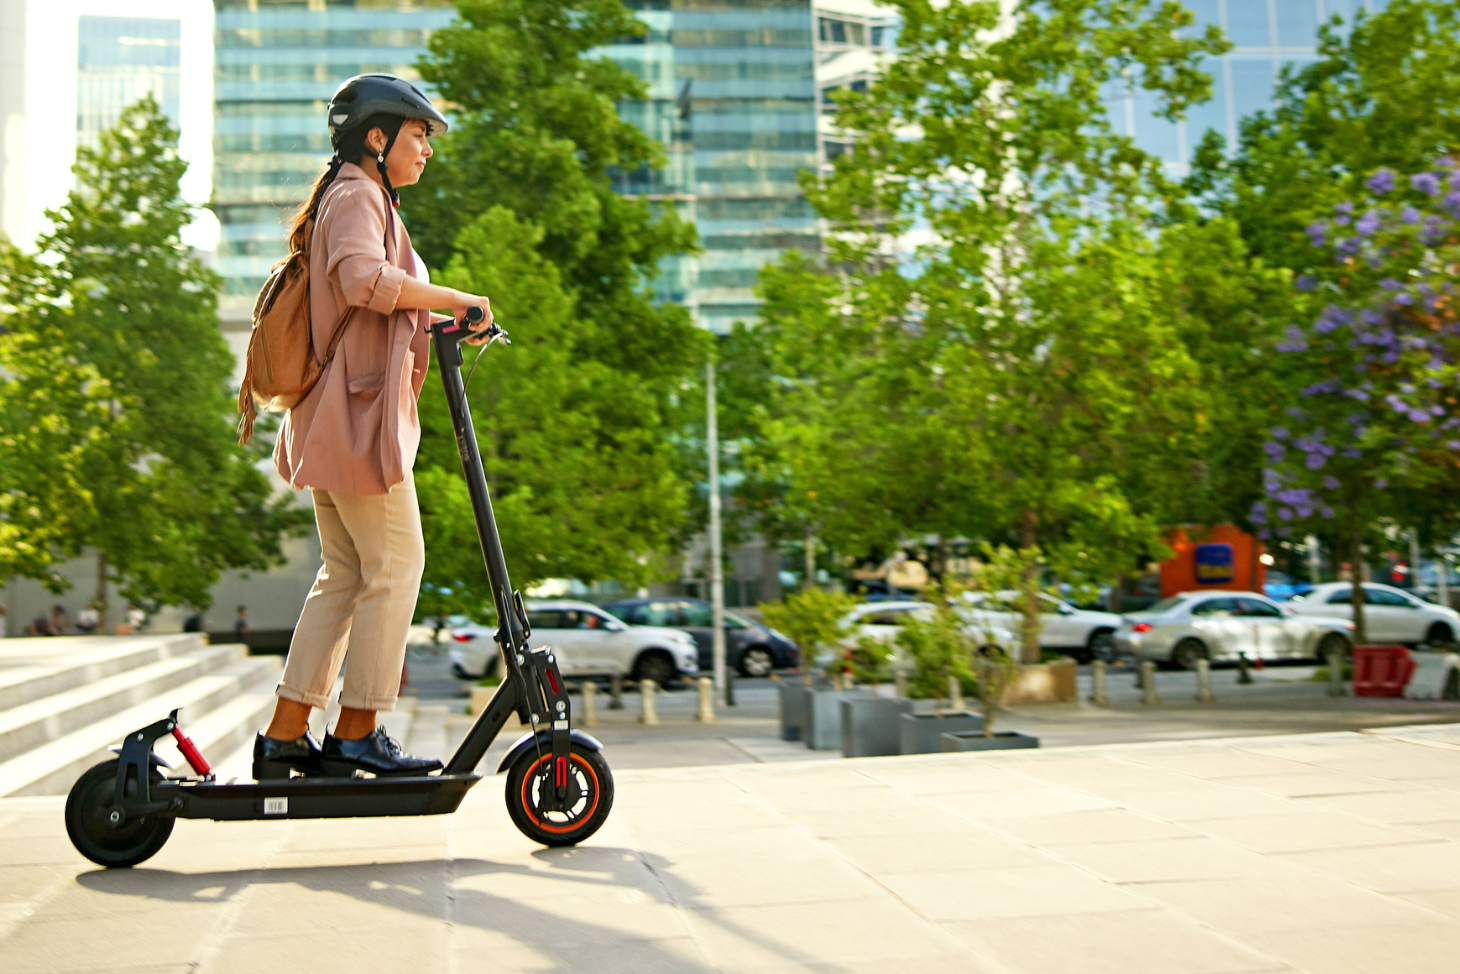 Woman wearing a helmet riding an electric scooter on the sidewalk